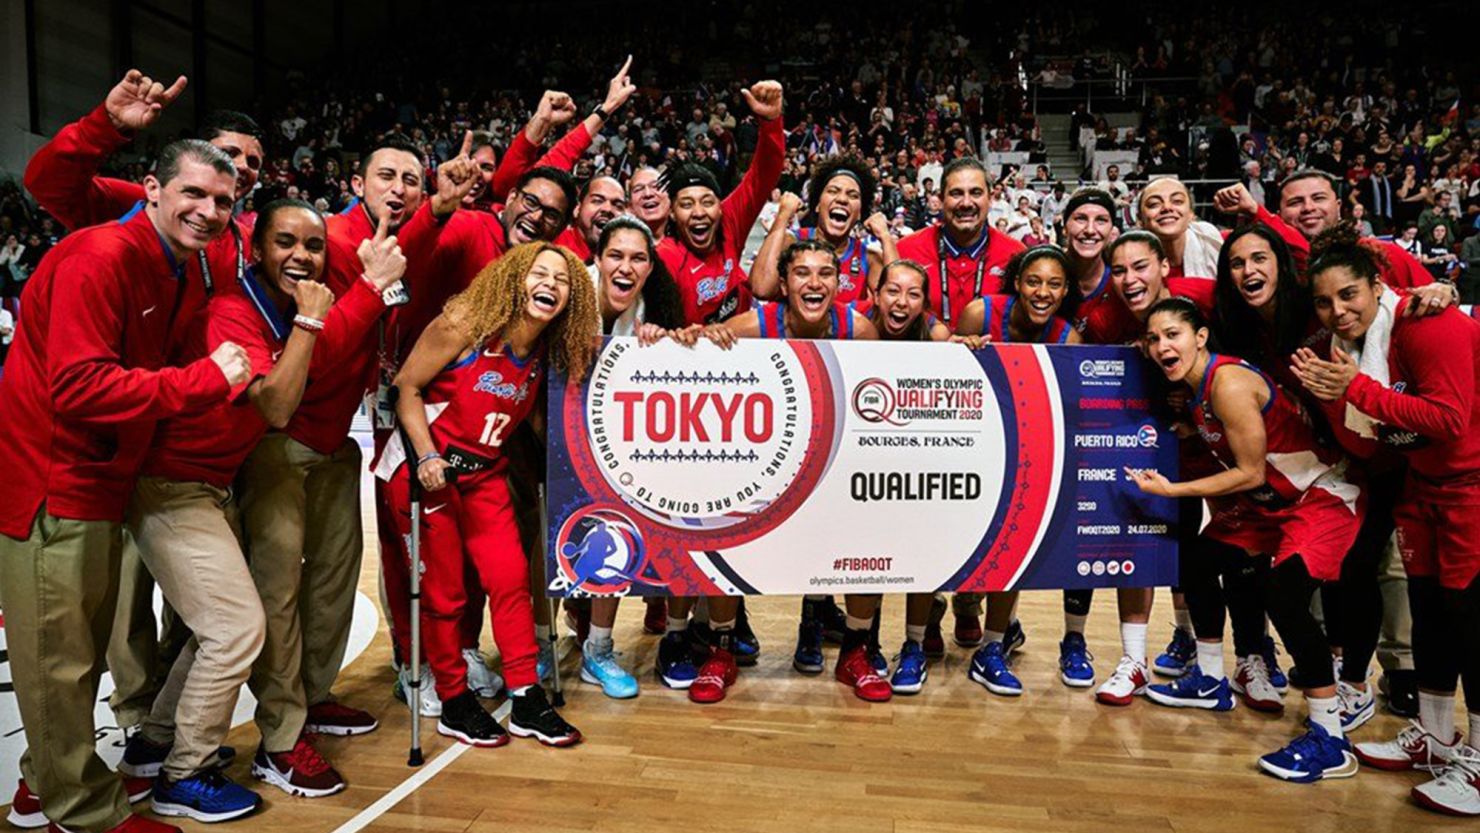 The Puerto Rican Woman's Basketball team will be heading to the Olympics for the first time in the team's history, according to the International Basketball Federation (FIBA).